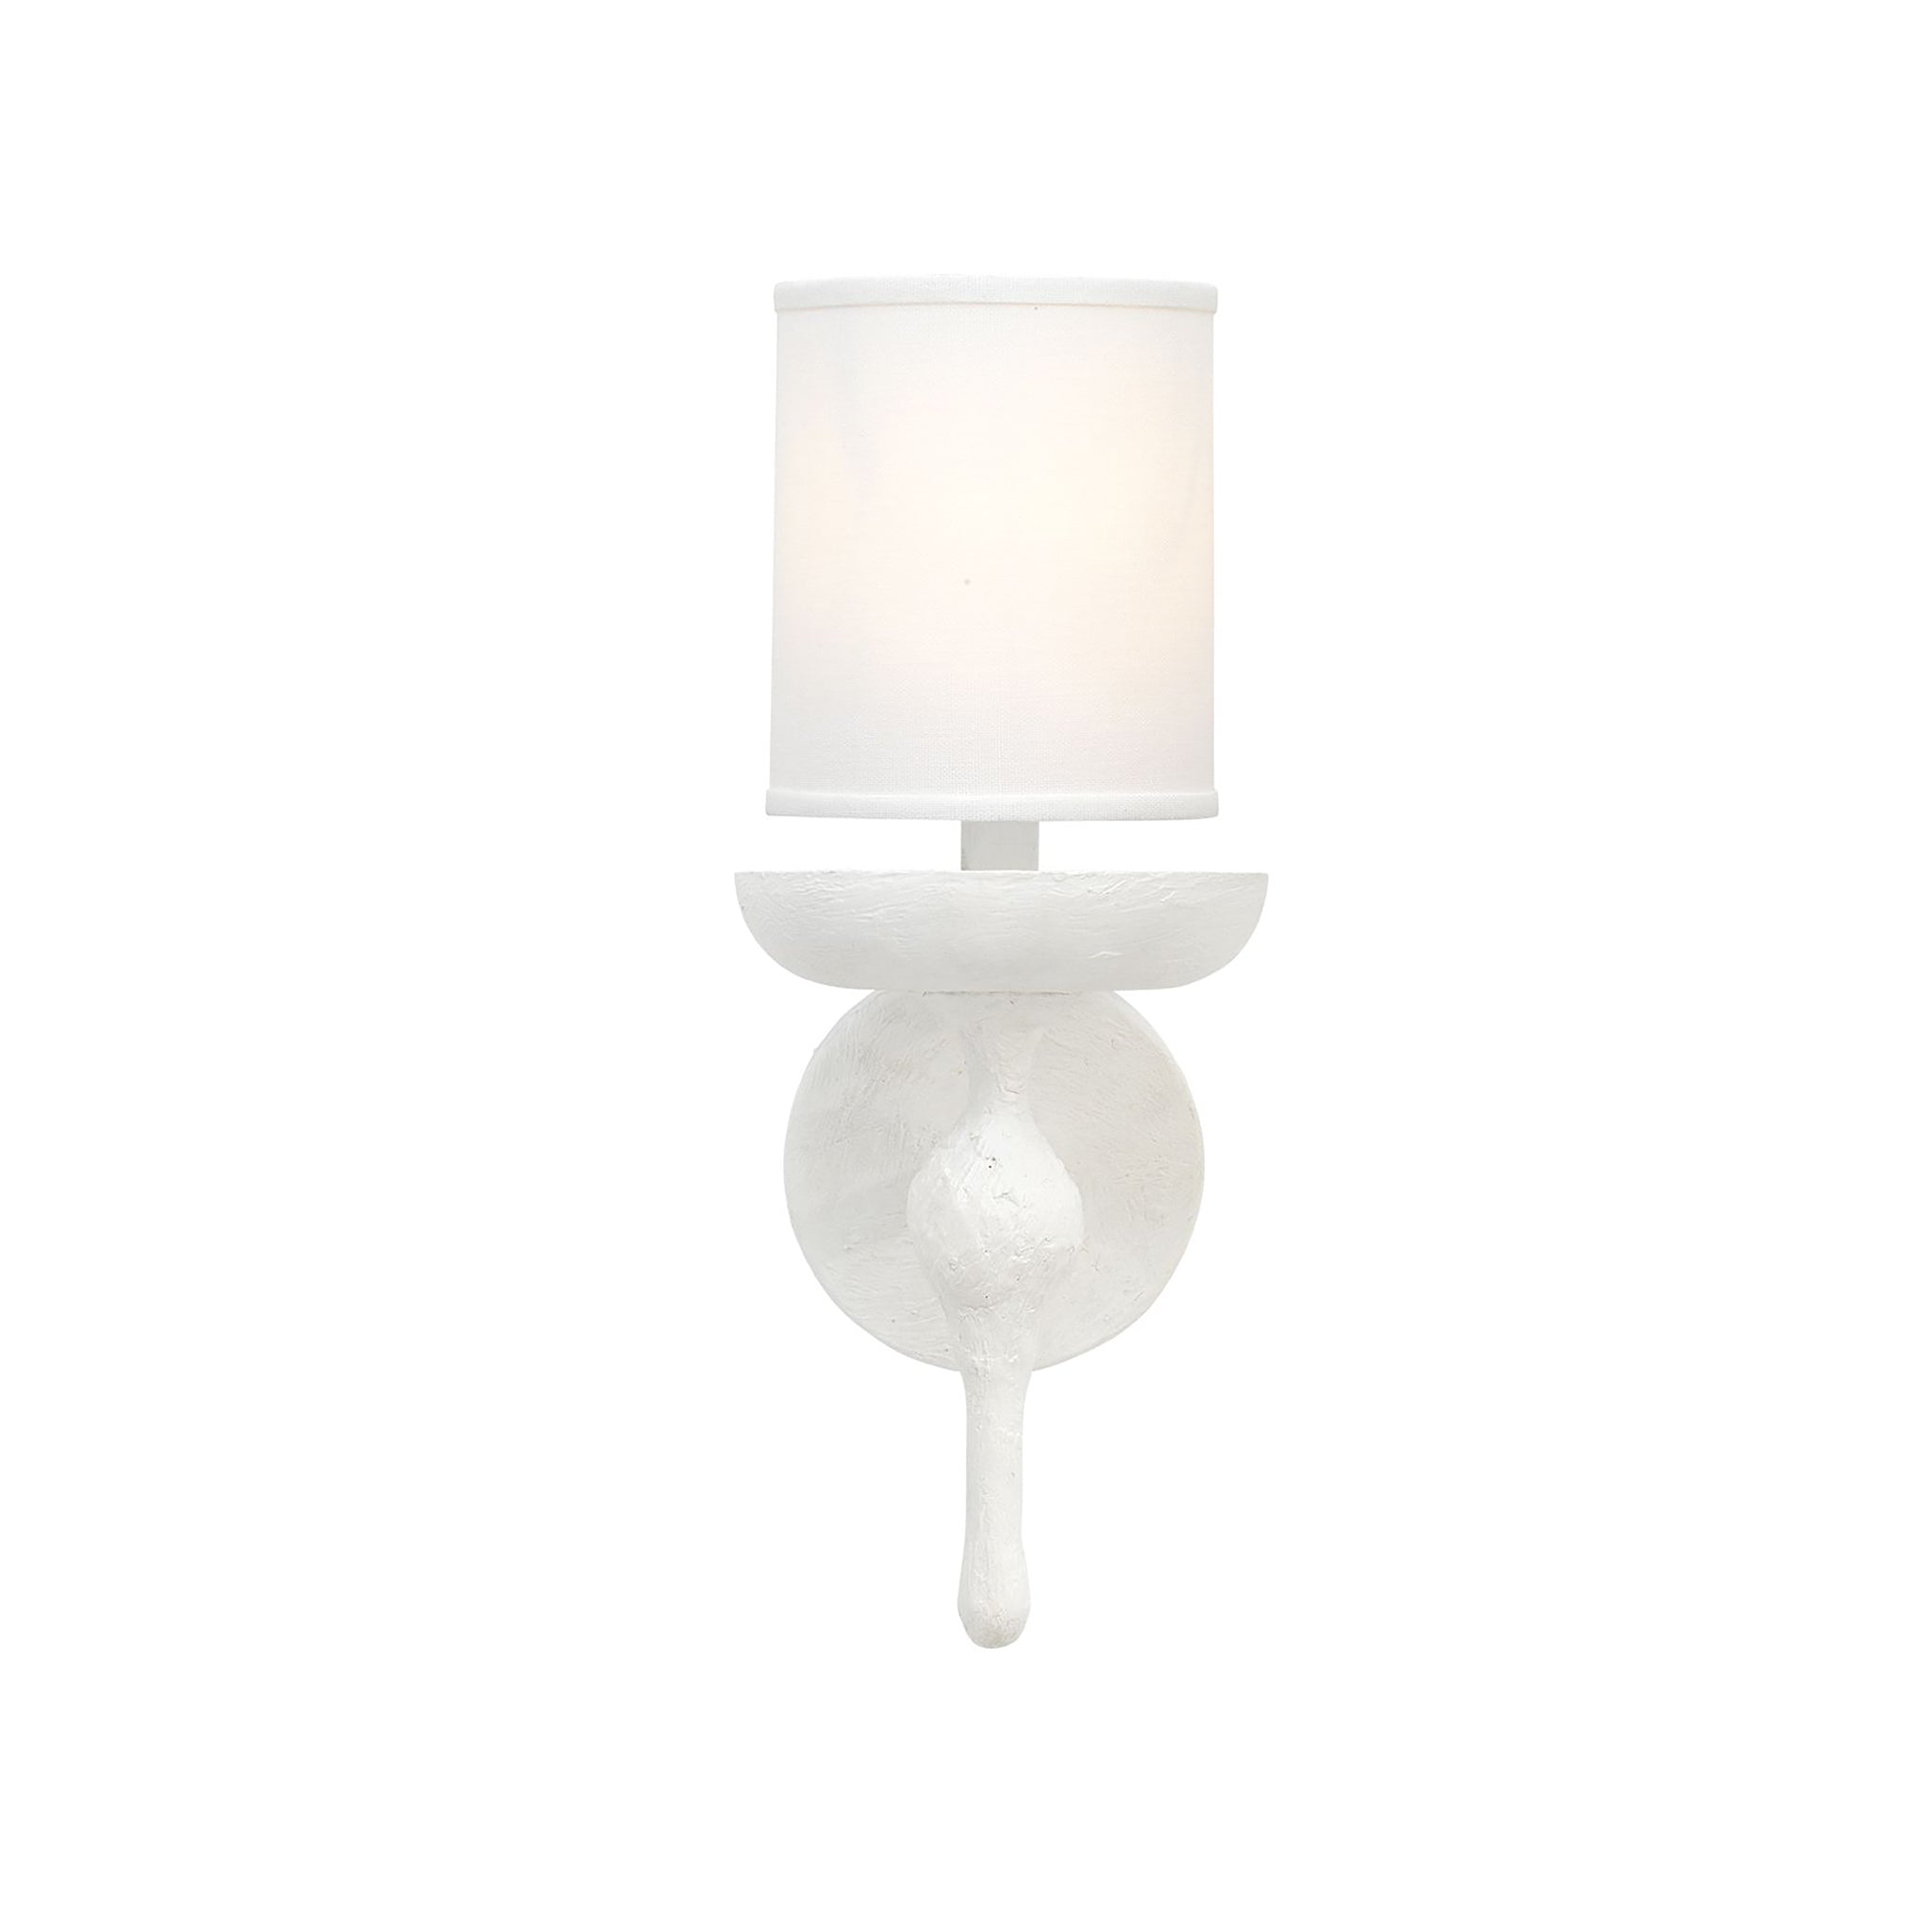 Stockholm Wall Sconce in White Plaster